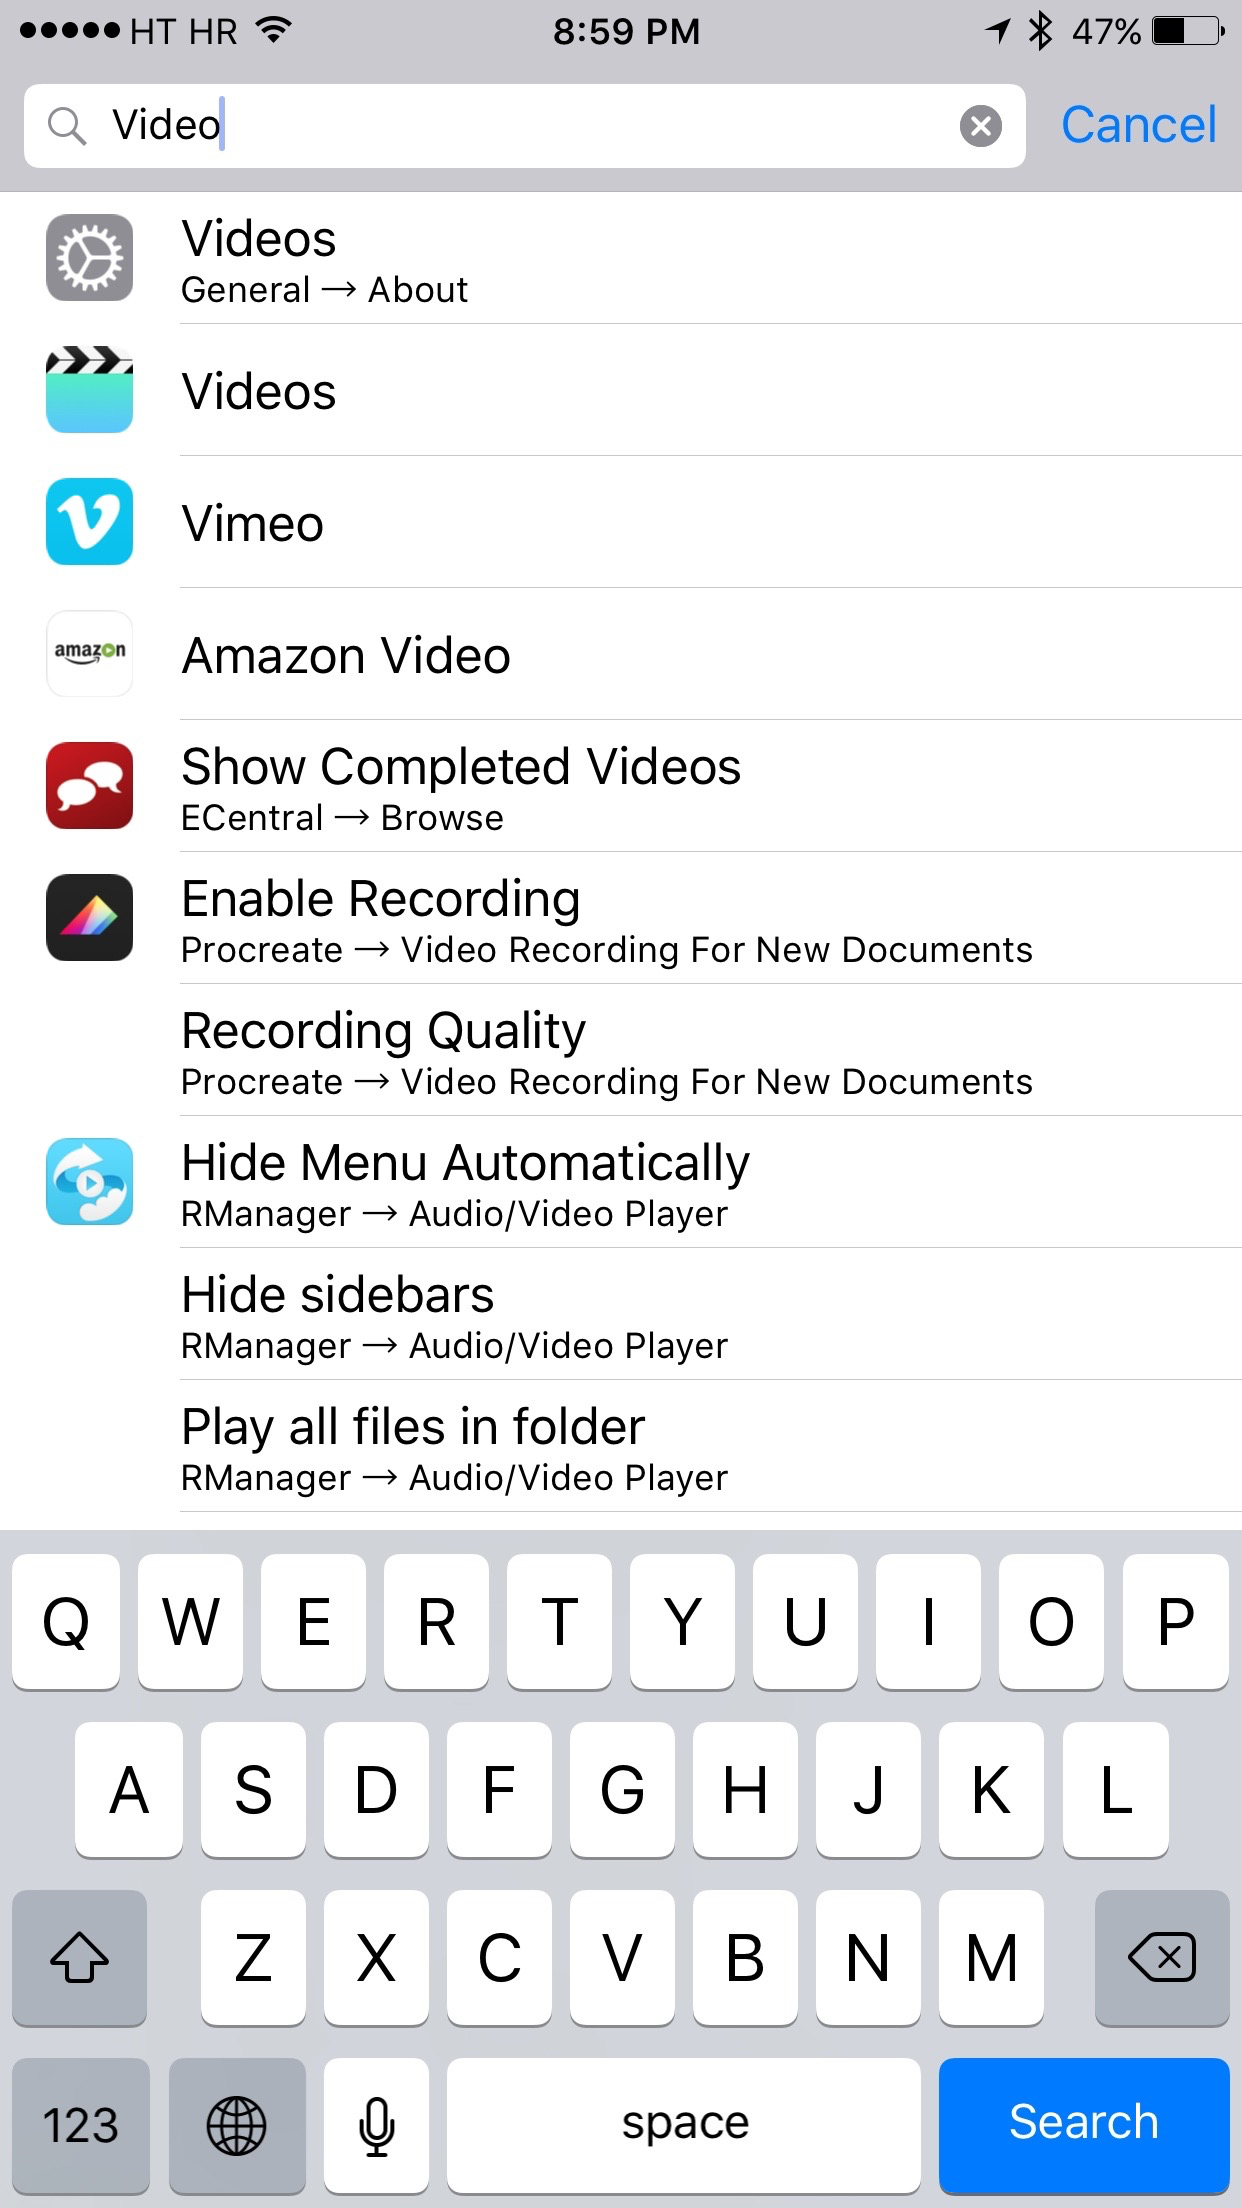 How to locate a specific setting on iPhone or iPad